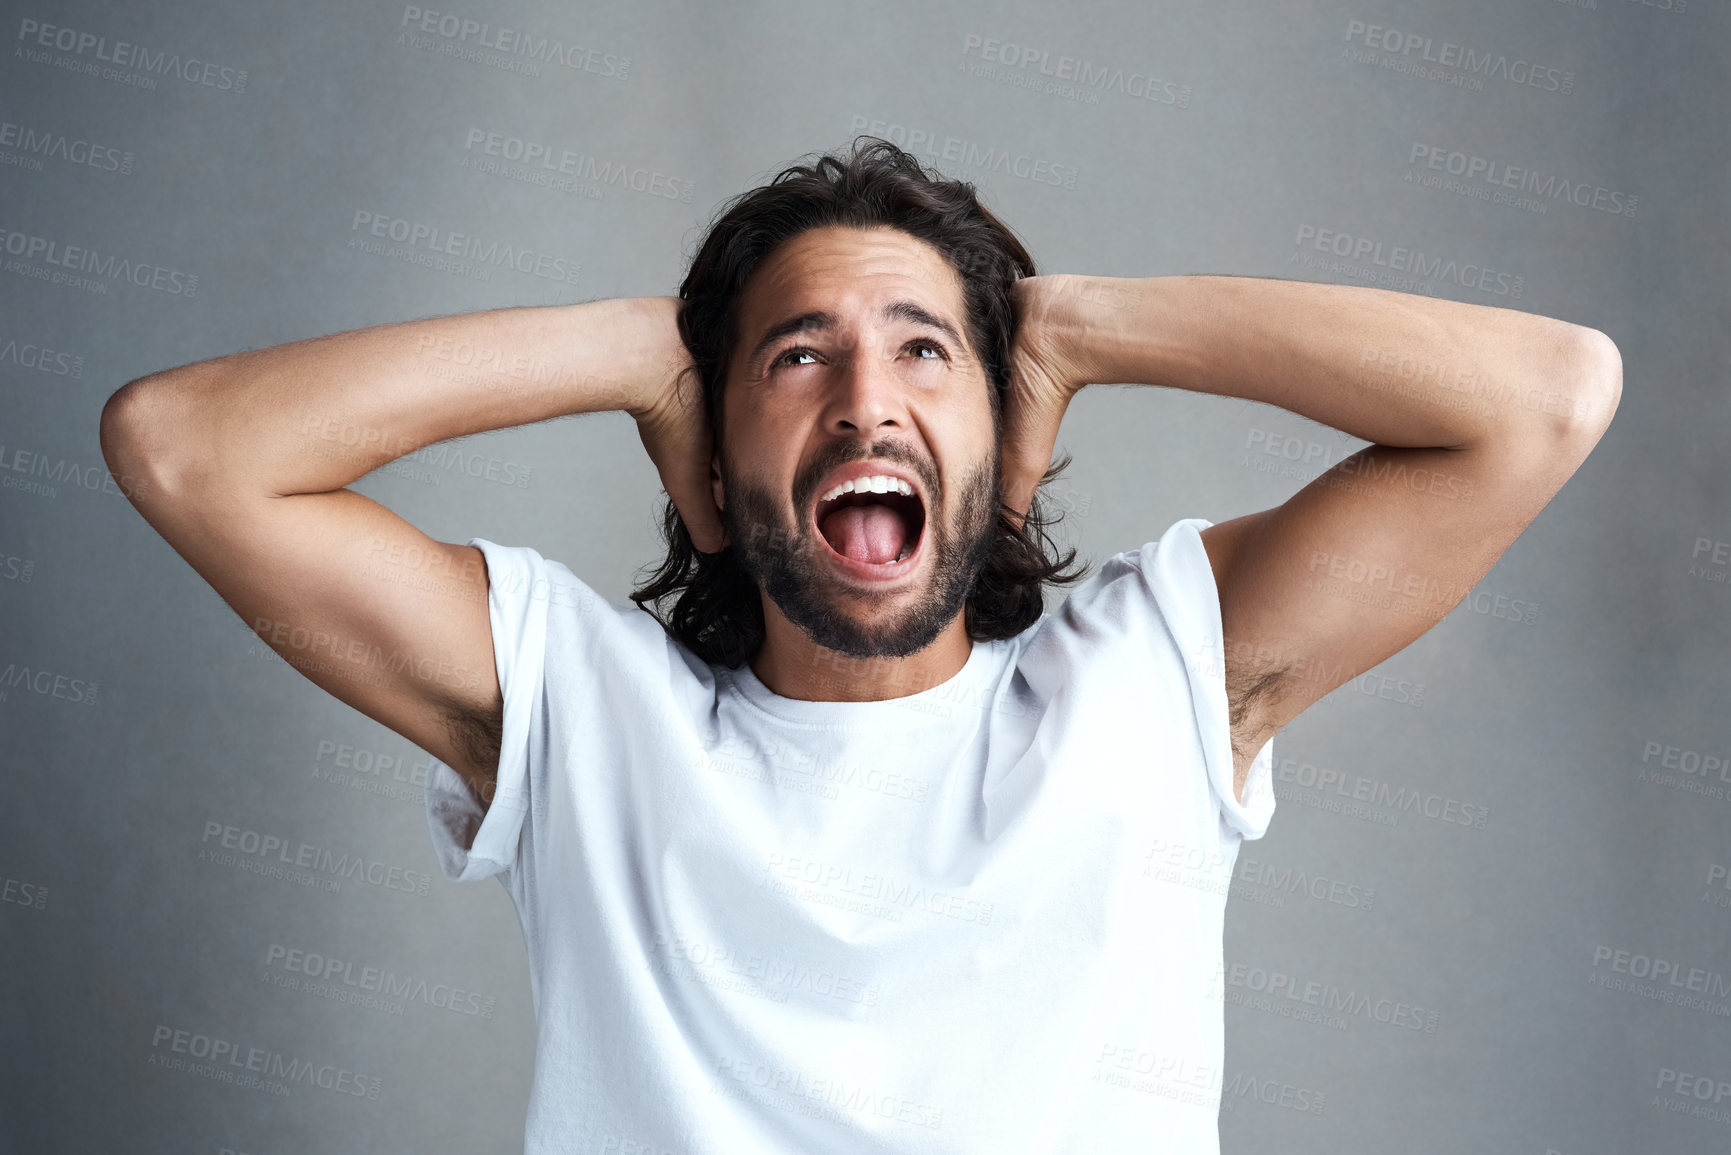 Buy stock photo Studio shot of a young man screaming against a grey background